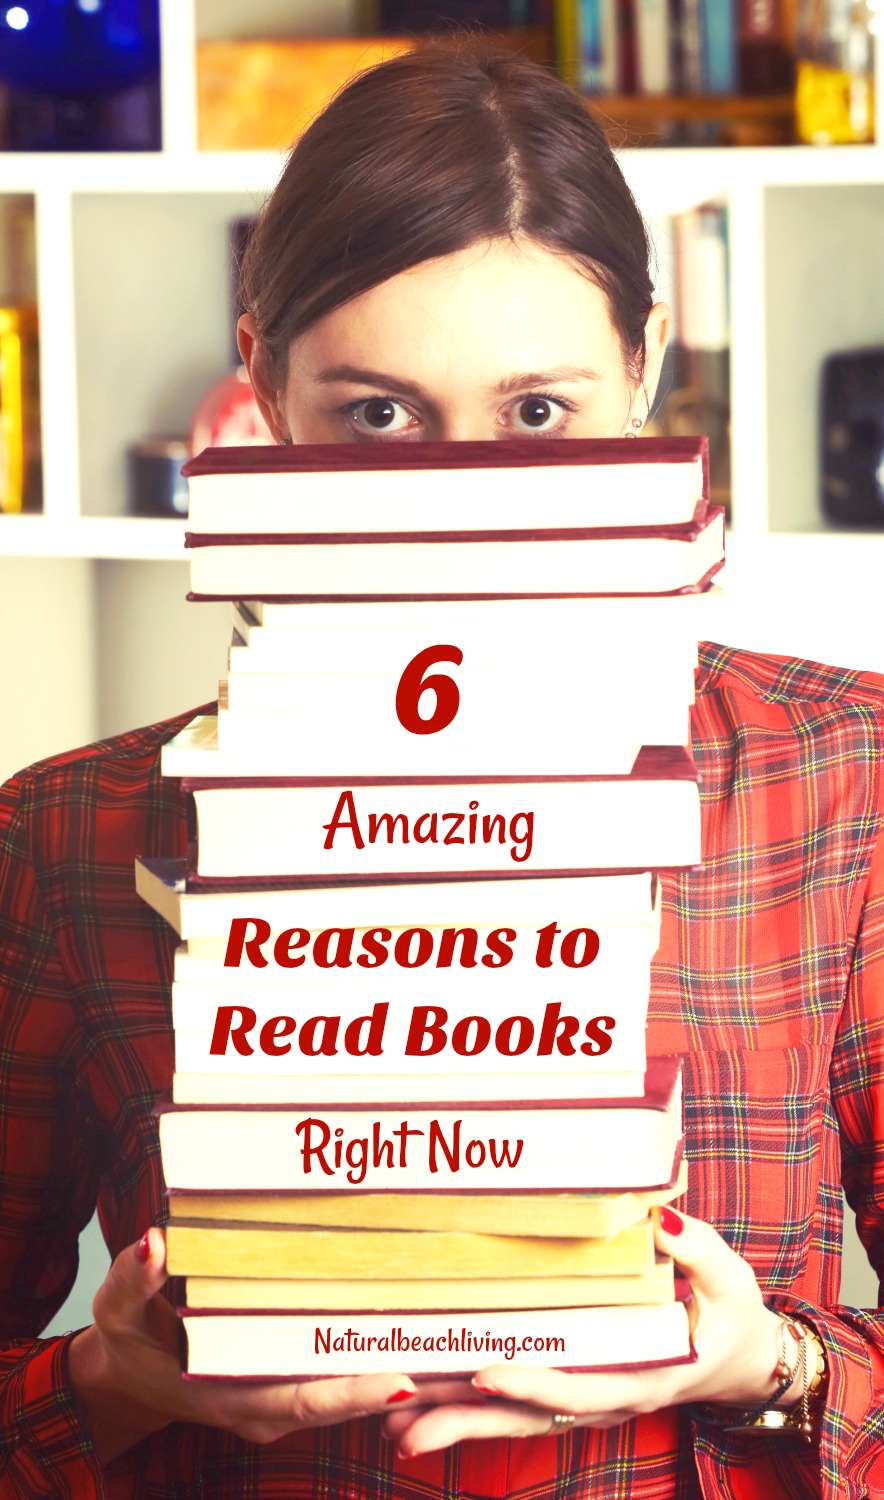 8 Amazing Reasons to Read Books Right Now: Plus, over 100 reasons Why it’s important to read!